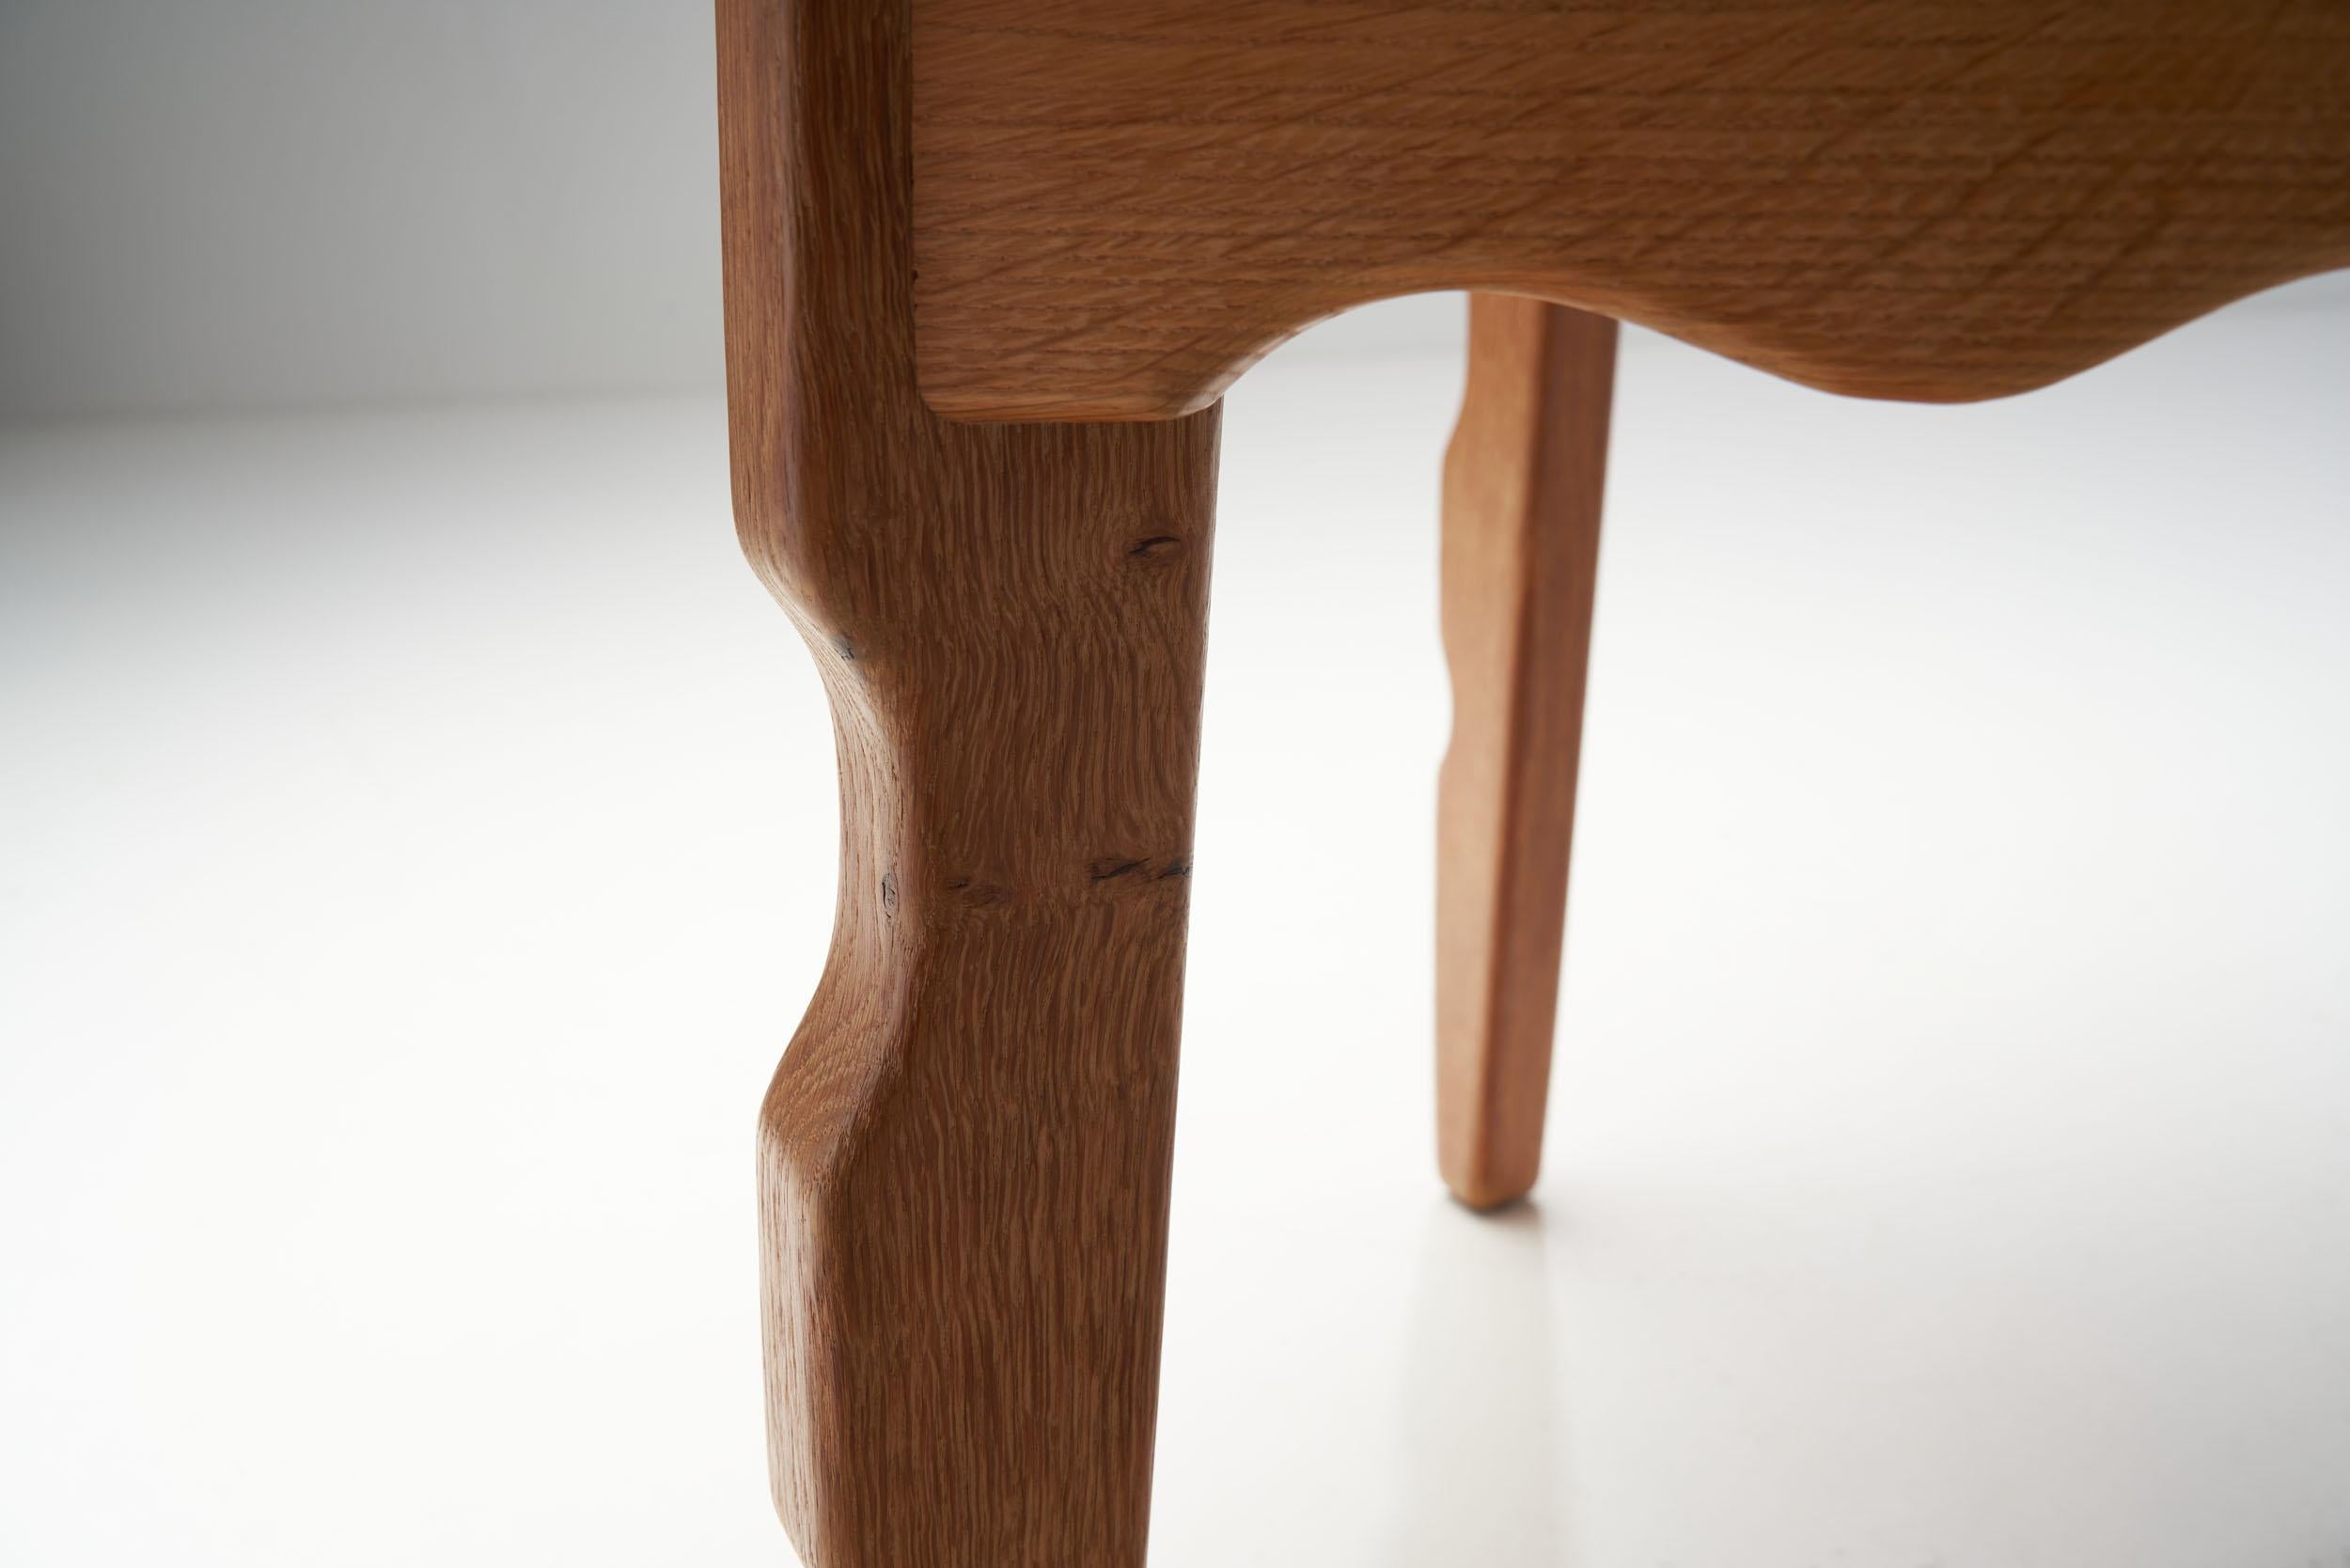 Solid Oak Coffee Table with Sculptural Legs, Denmark, ca 1950s For Sale 10